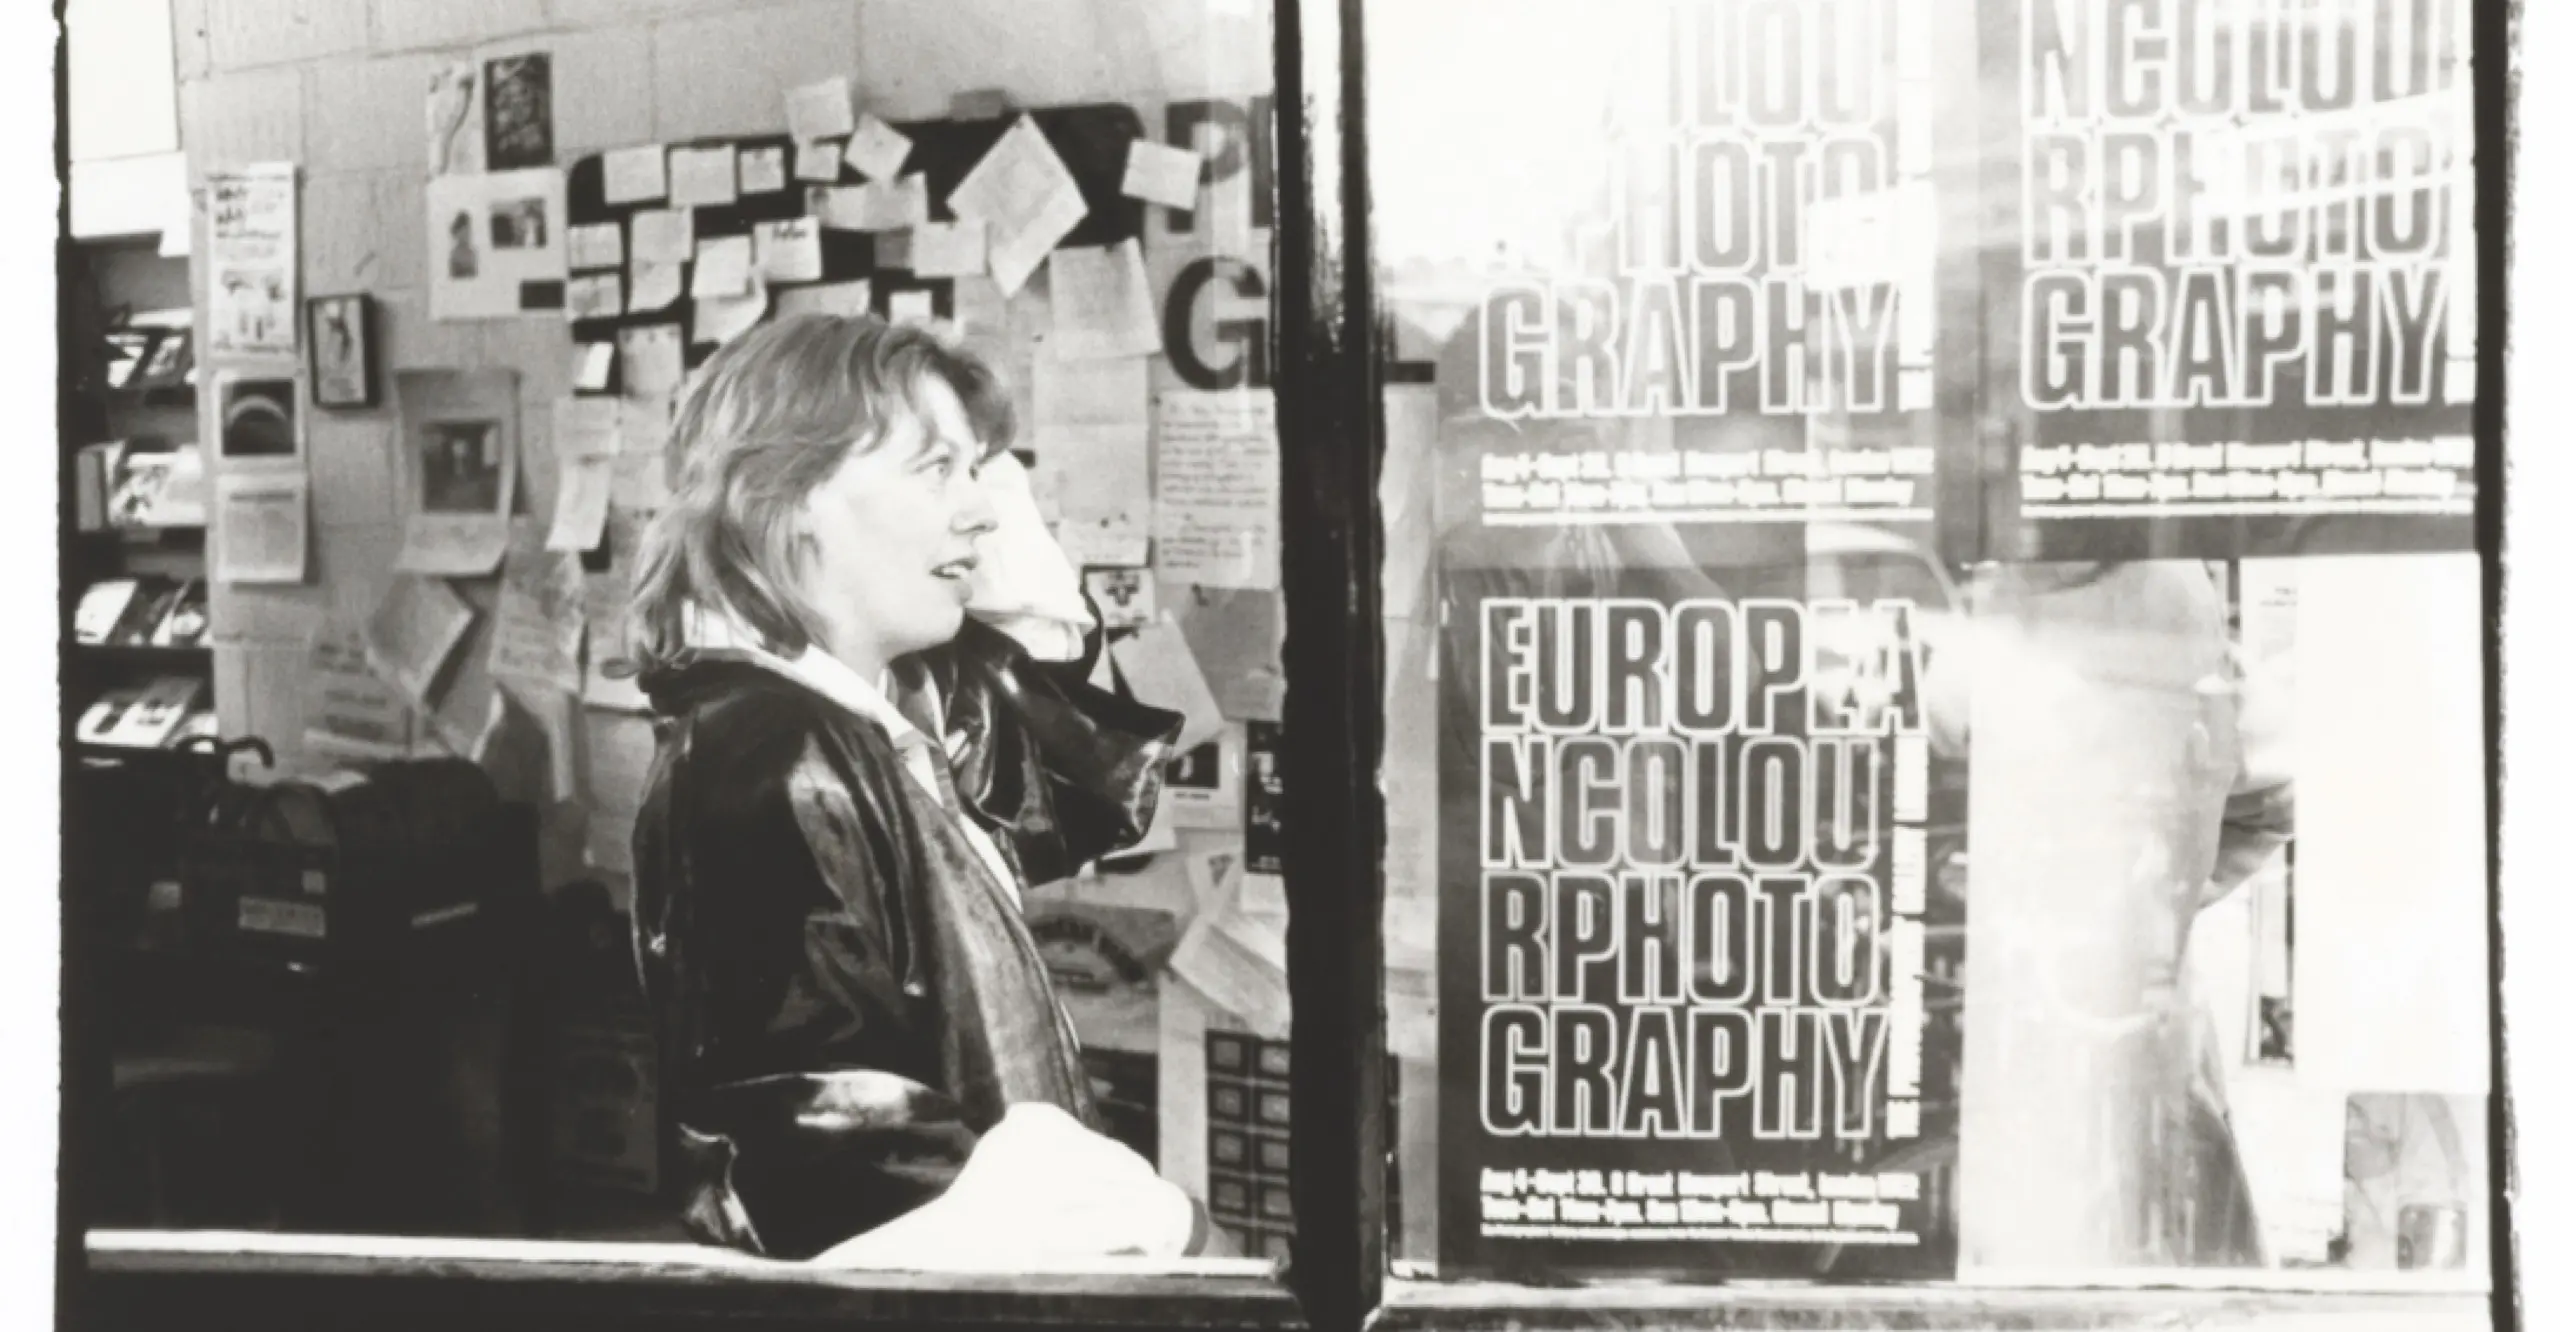 Sue Davies, founding director of The Photographers' Gallery, pictured with New European Colour photography posters, 1978. Photographer unknown